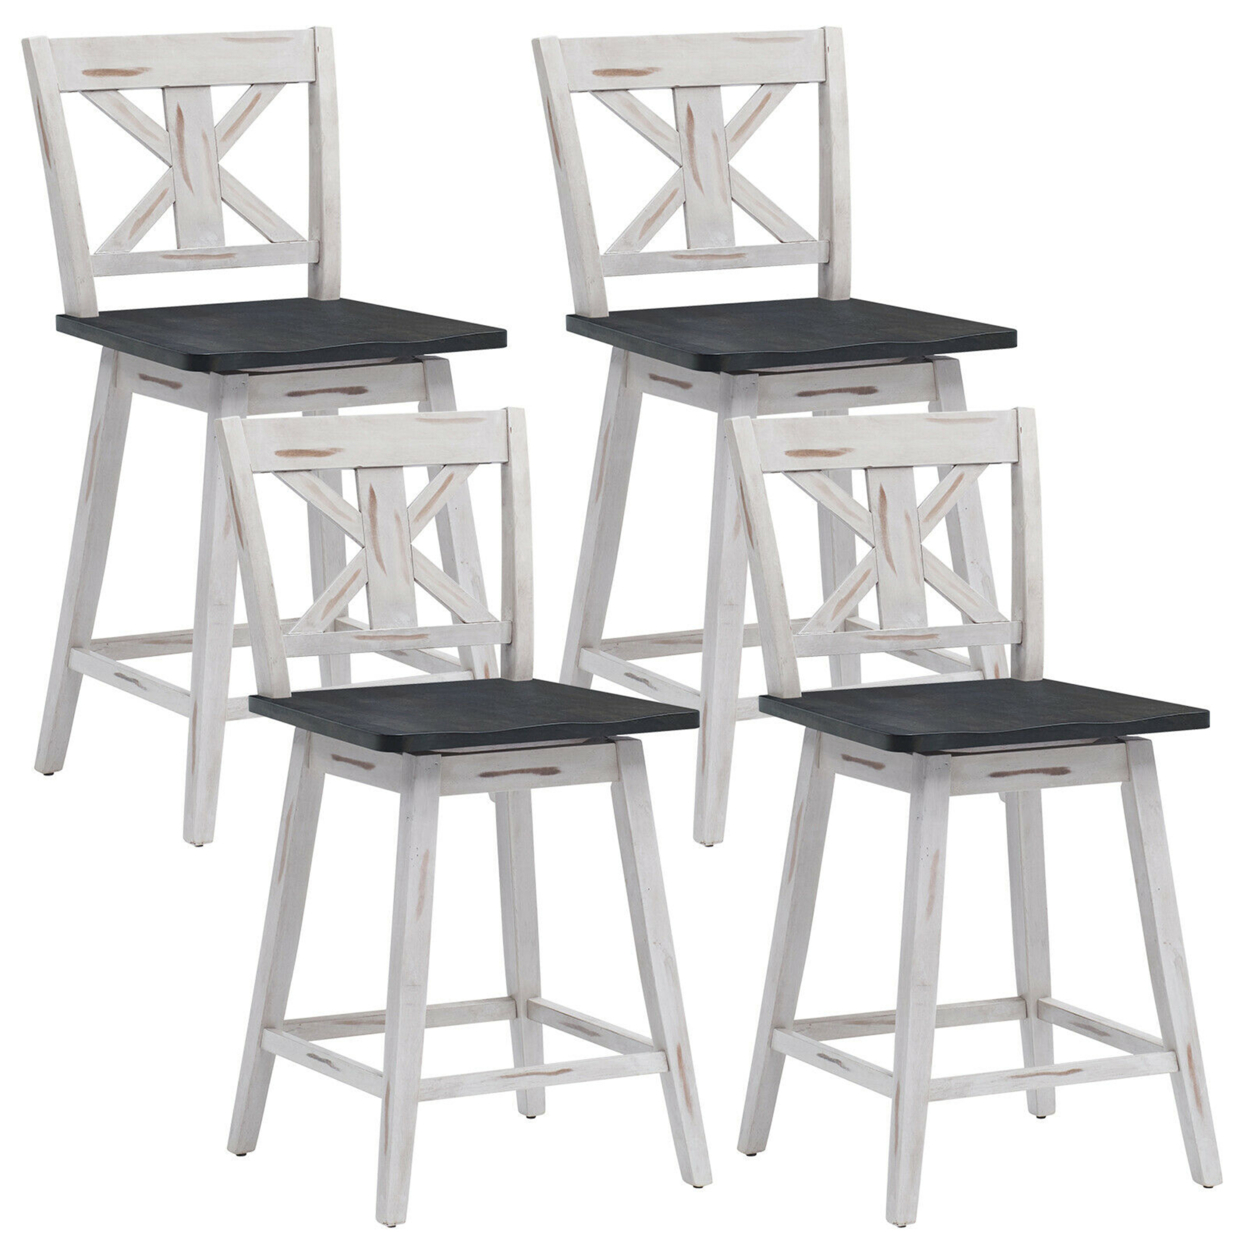 4PCS Swivel Bar Stools W/ Footrest Counter Height Chairs For Home - White